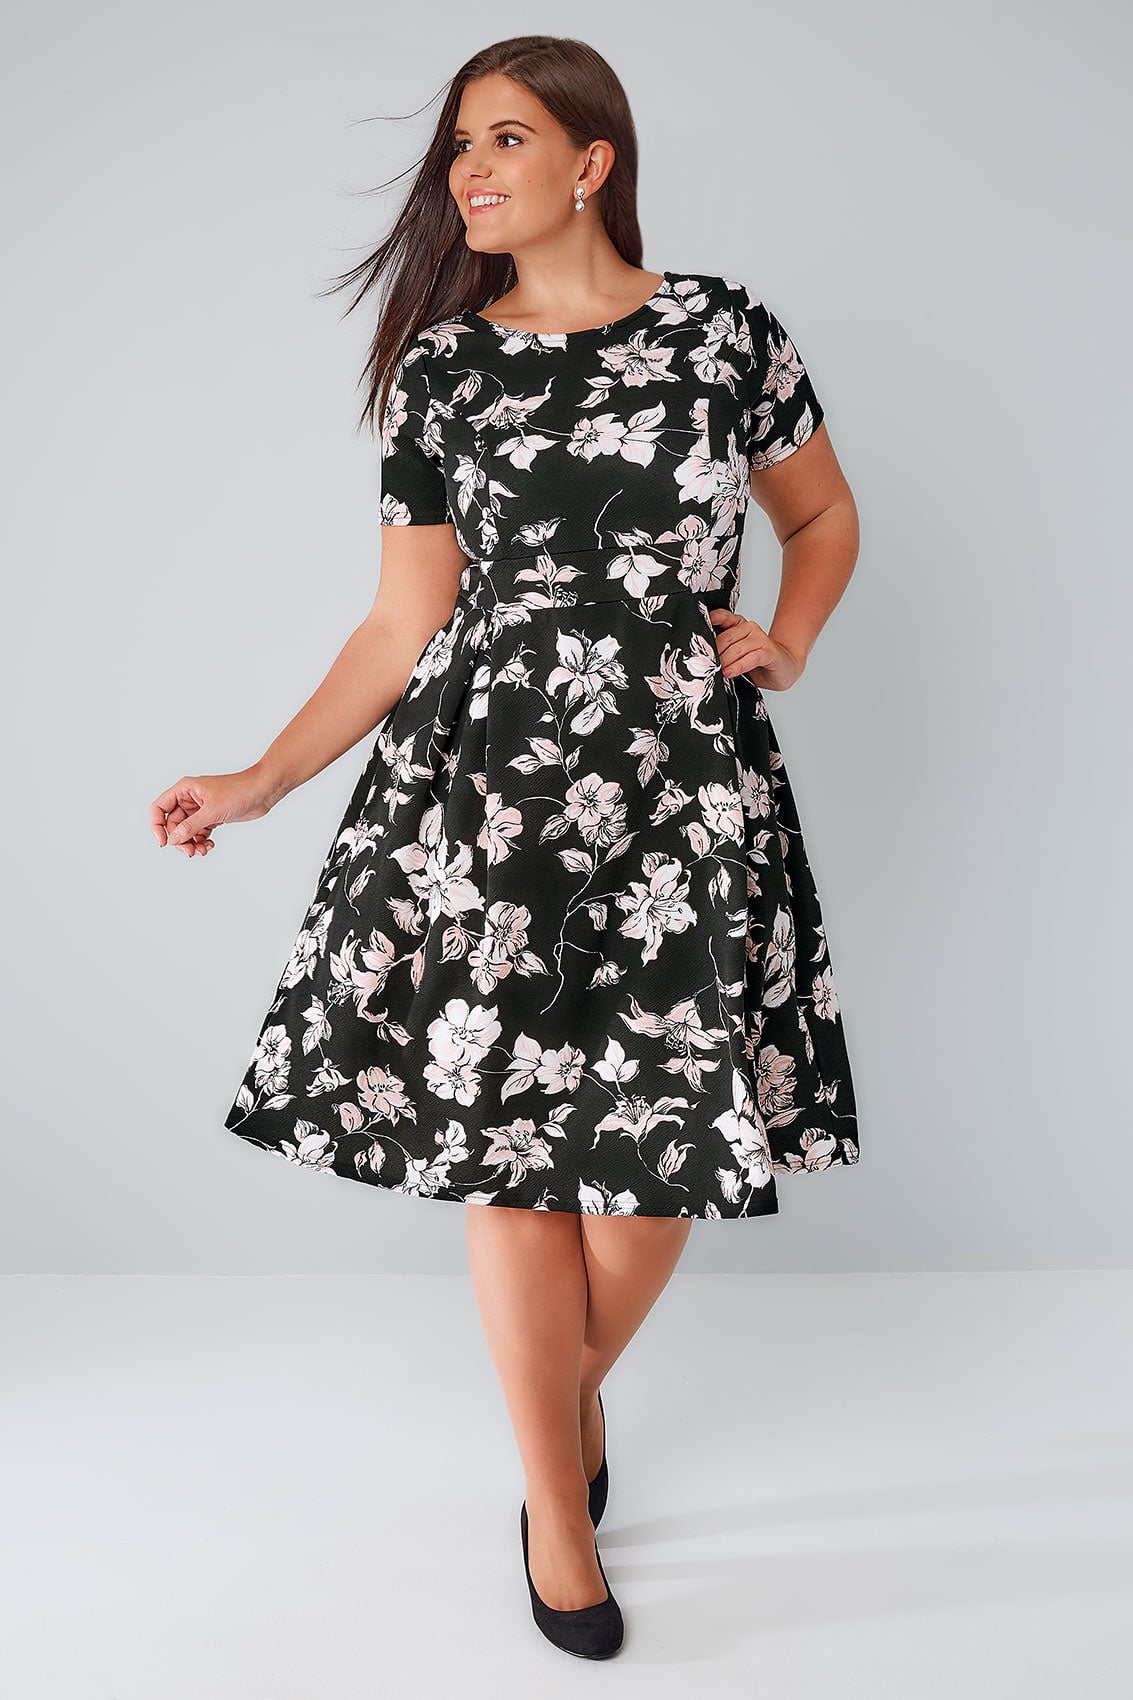 Black Floral Print Skater Dress With Pleated Skirt, Plus size 16 to 36